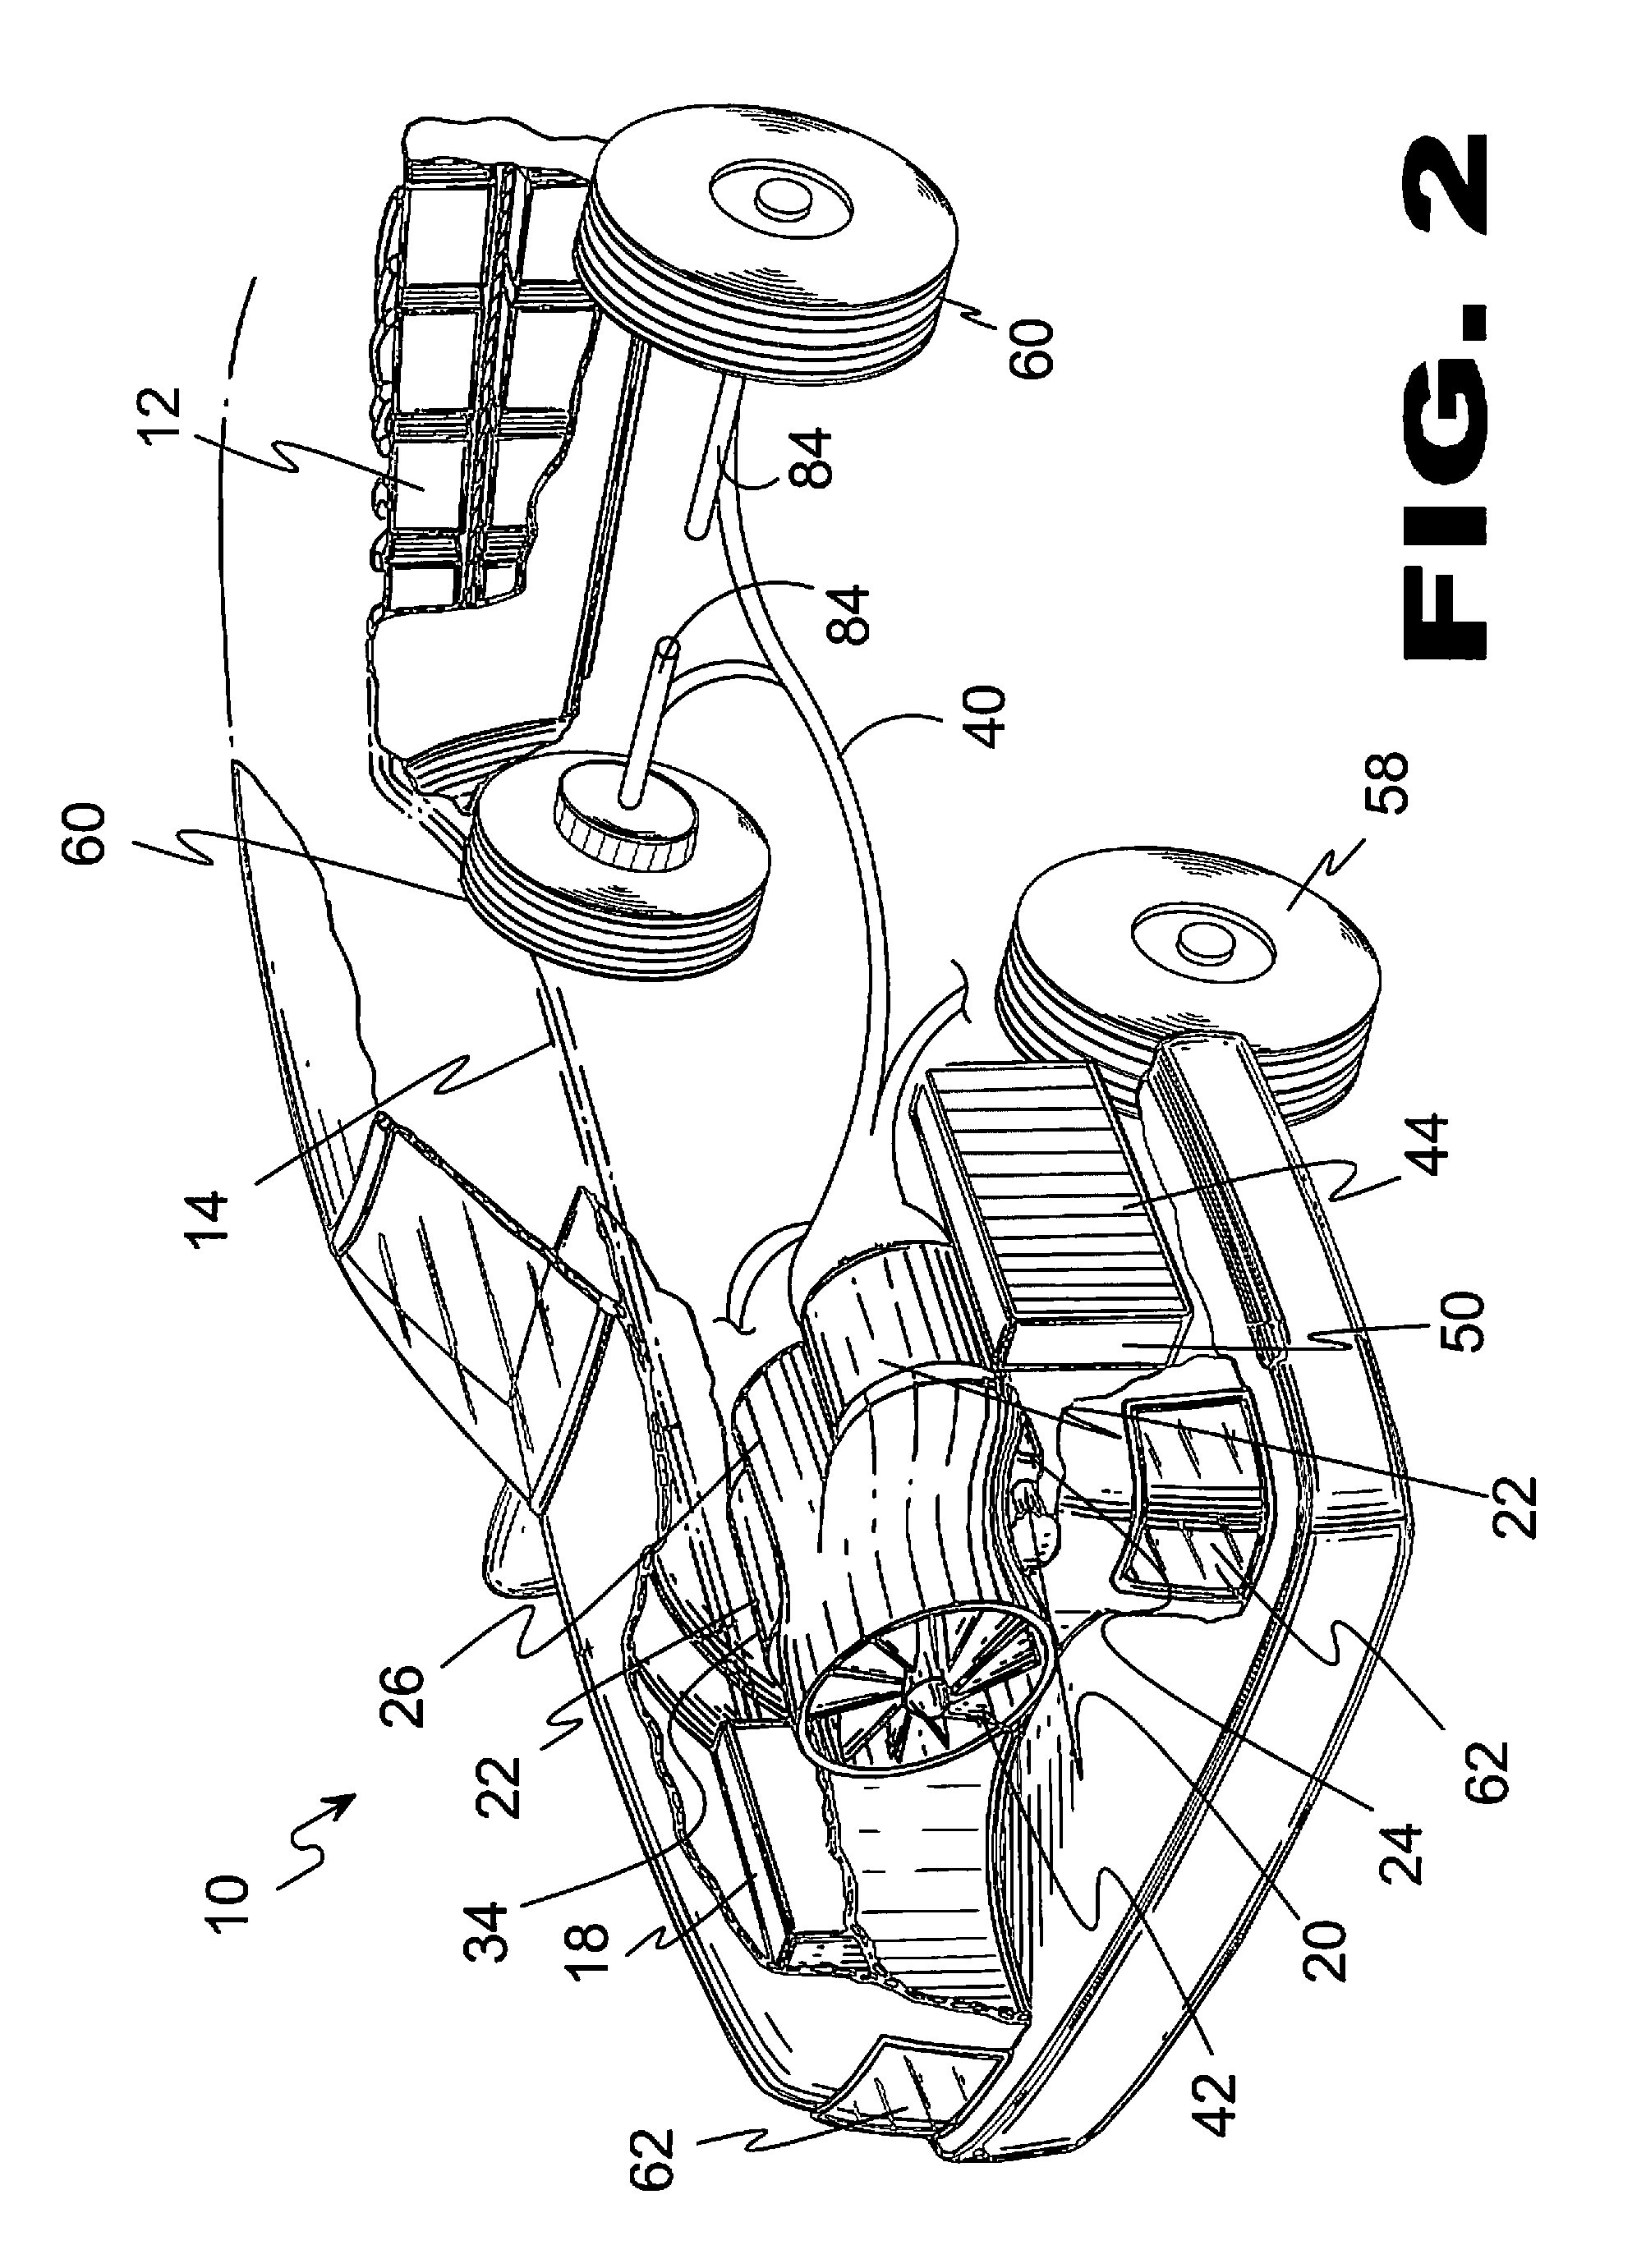 Intermittant electrical charging AC/DC driving system